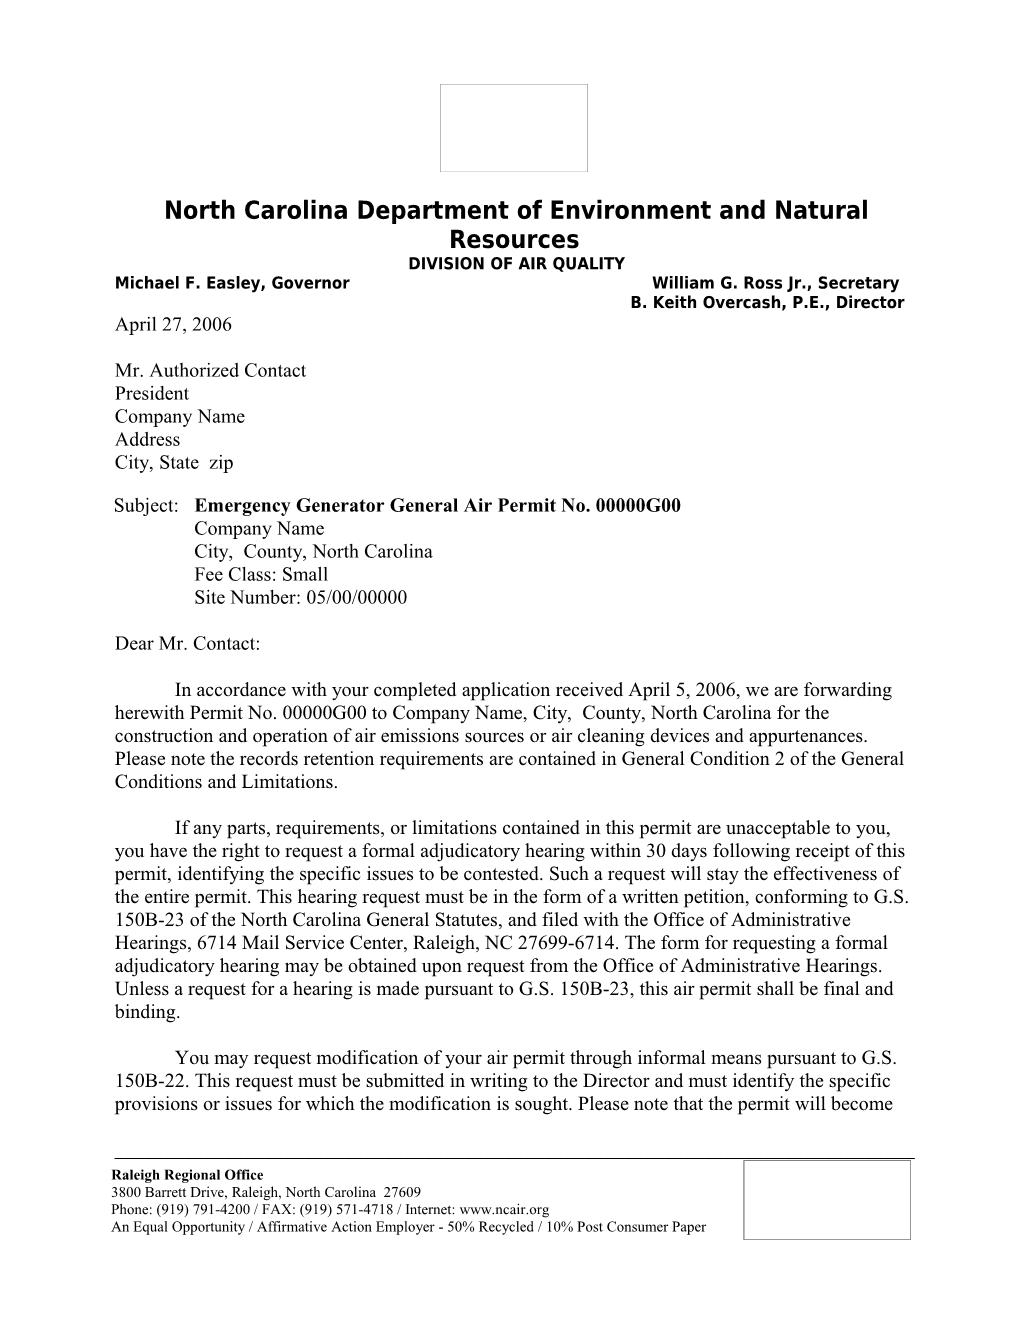 North Carolina Department of Environment and Natural Resources DIVISION of AIR QUALITY